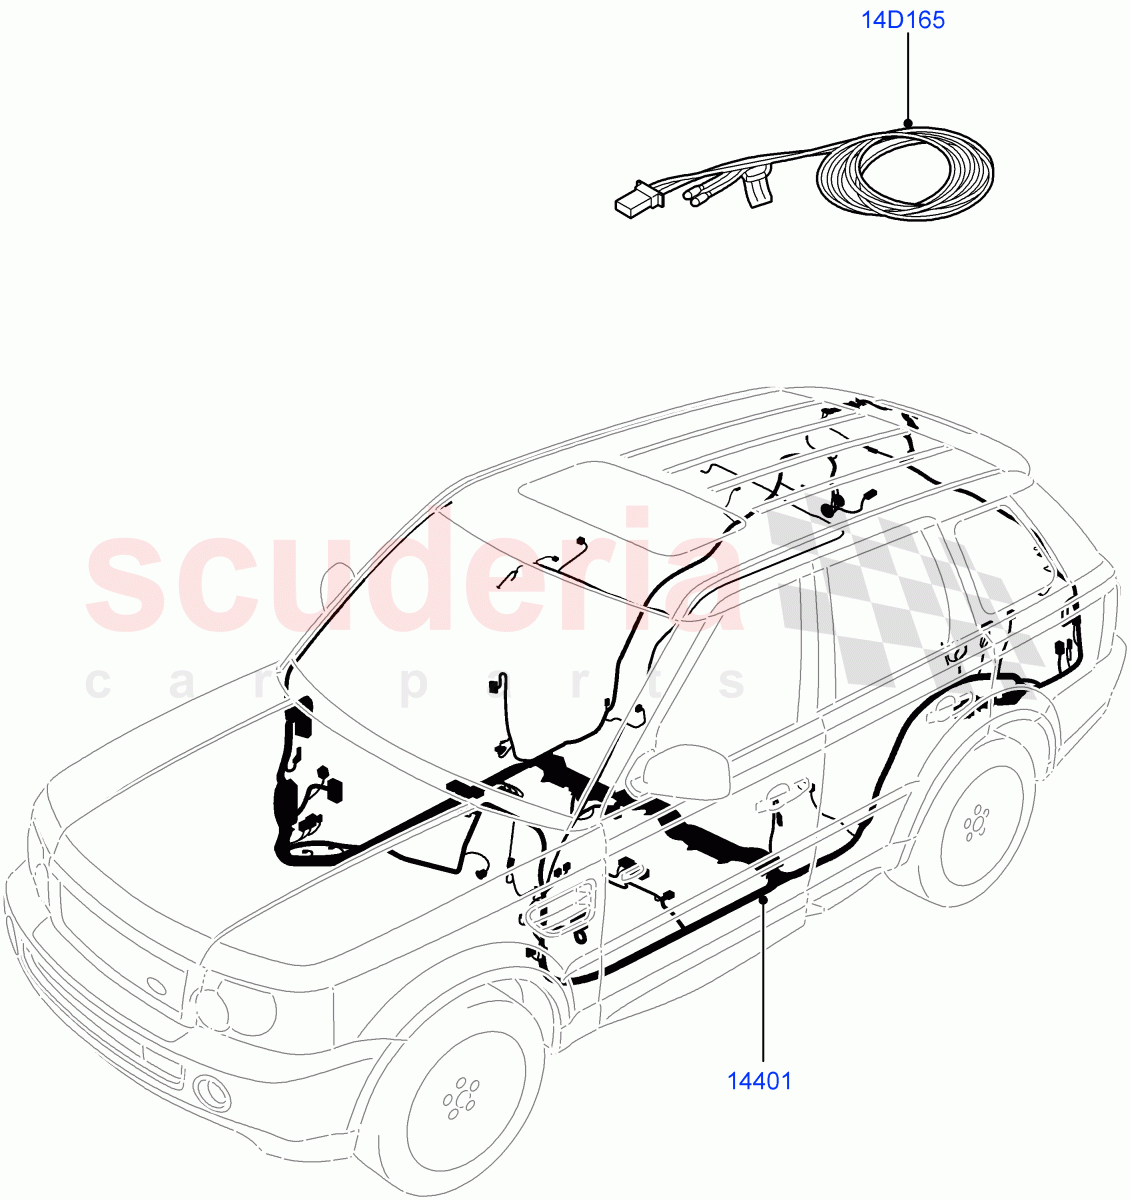 Electrical Wiring - Engine And Dash(Main Harness)((V)FROMBA000001,(V)TOBA999999) of Land Rover Land Rover Range Rover Sport (2010-2013) [5.0 OHC SGDI SC V8 Petrol]